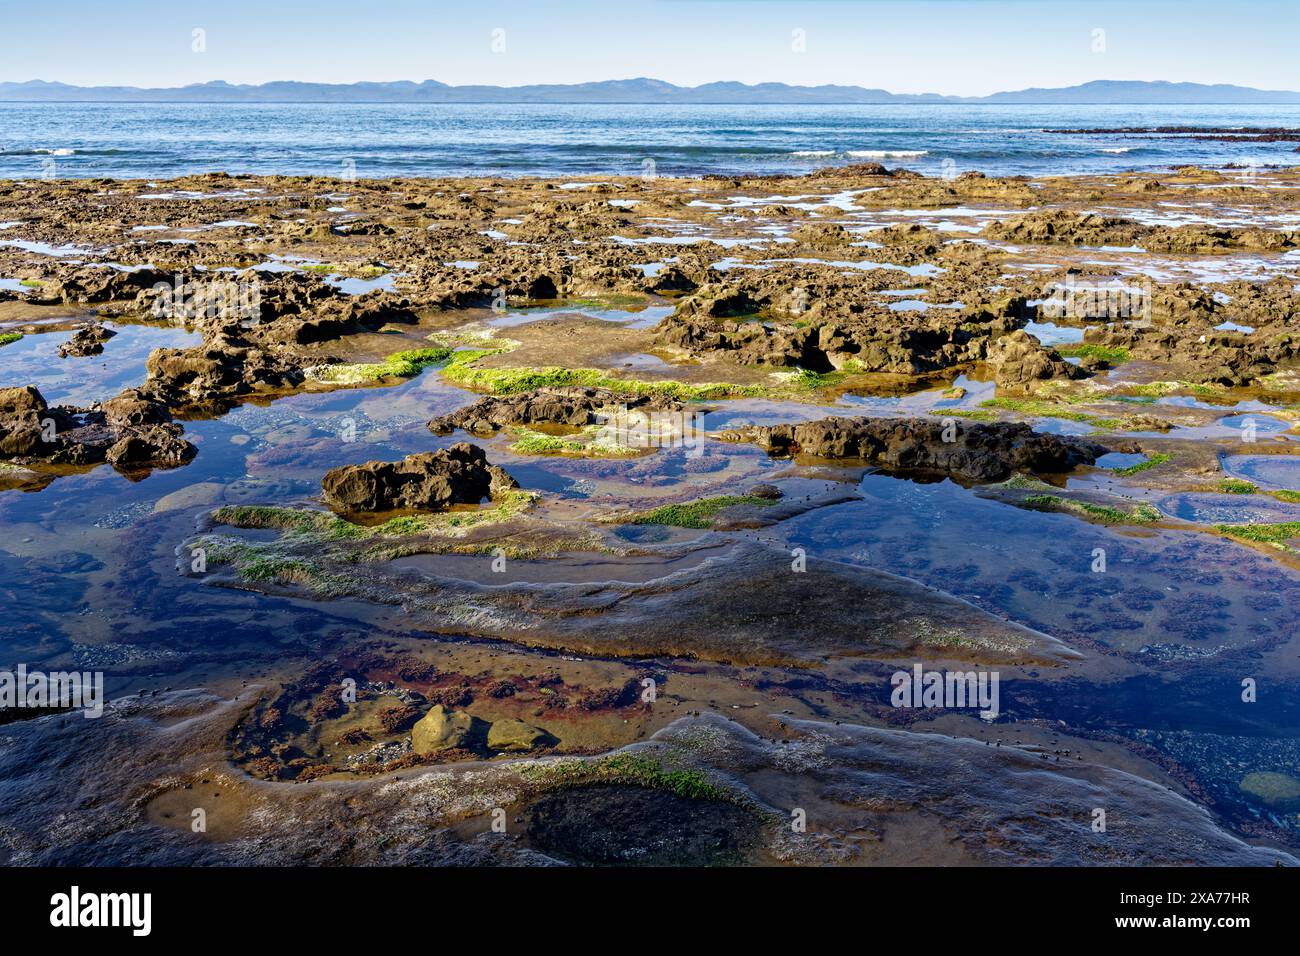 A scenic view of tide pools at Botanical Beach, Port Renfrew, British Columbia, Canada. Stock Photo